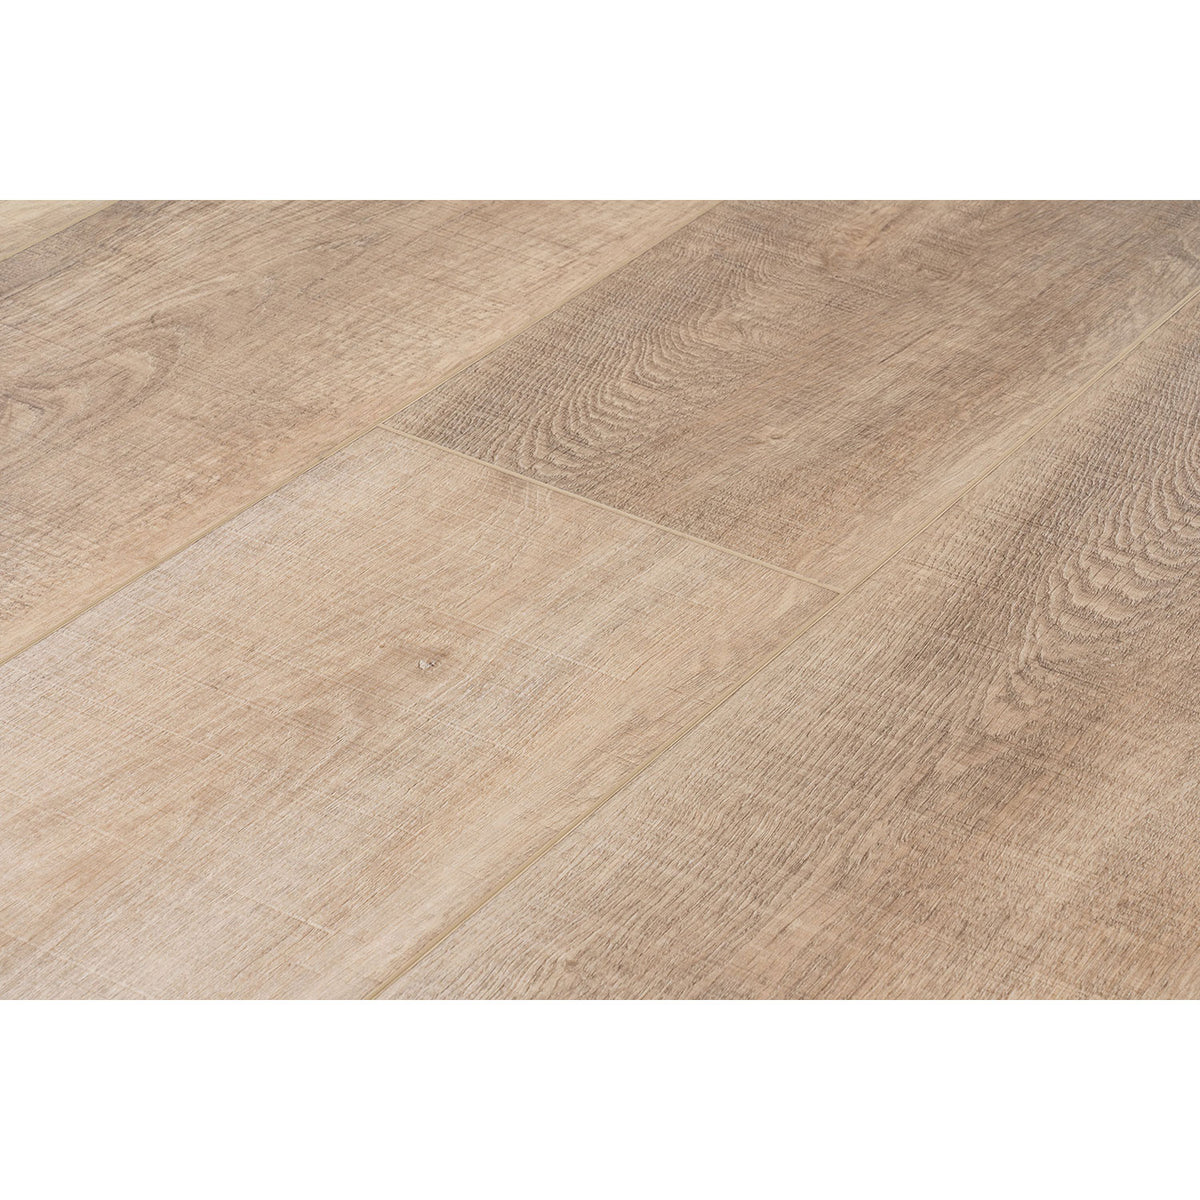 Provenza Floors - Moda Living Luxury Vinyl Plank - After Party Extra View 3